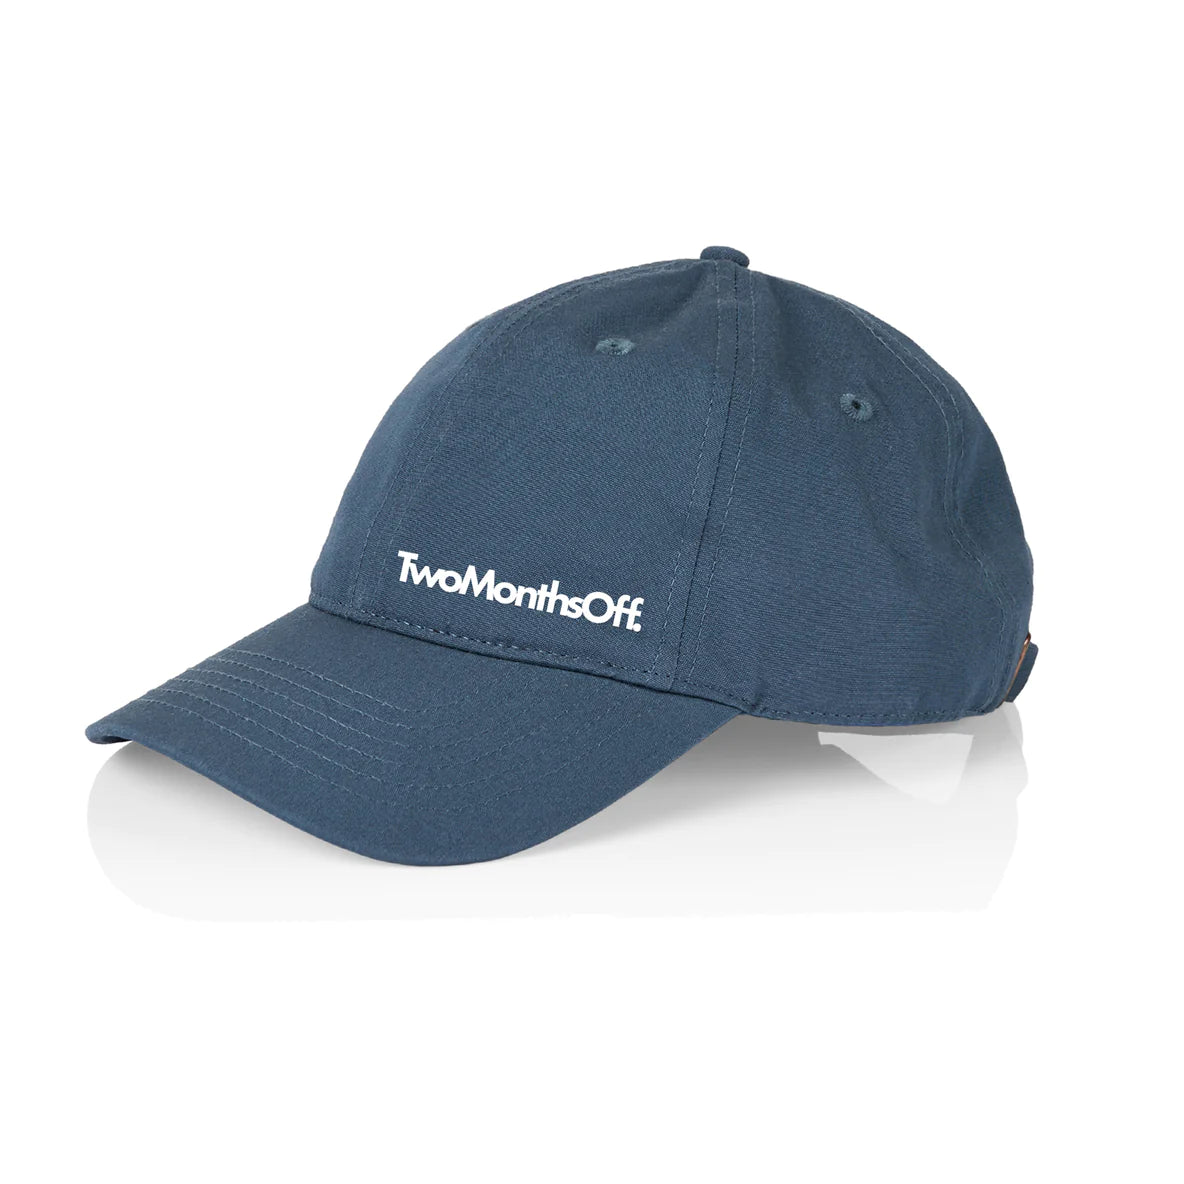 Underworld - *Two Months Off Limited Drop* Two Months Off Embroidered Cap